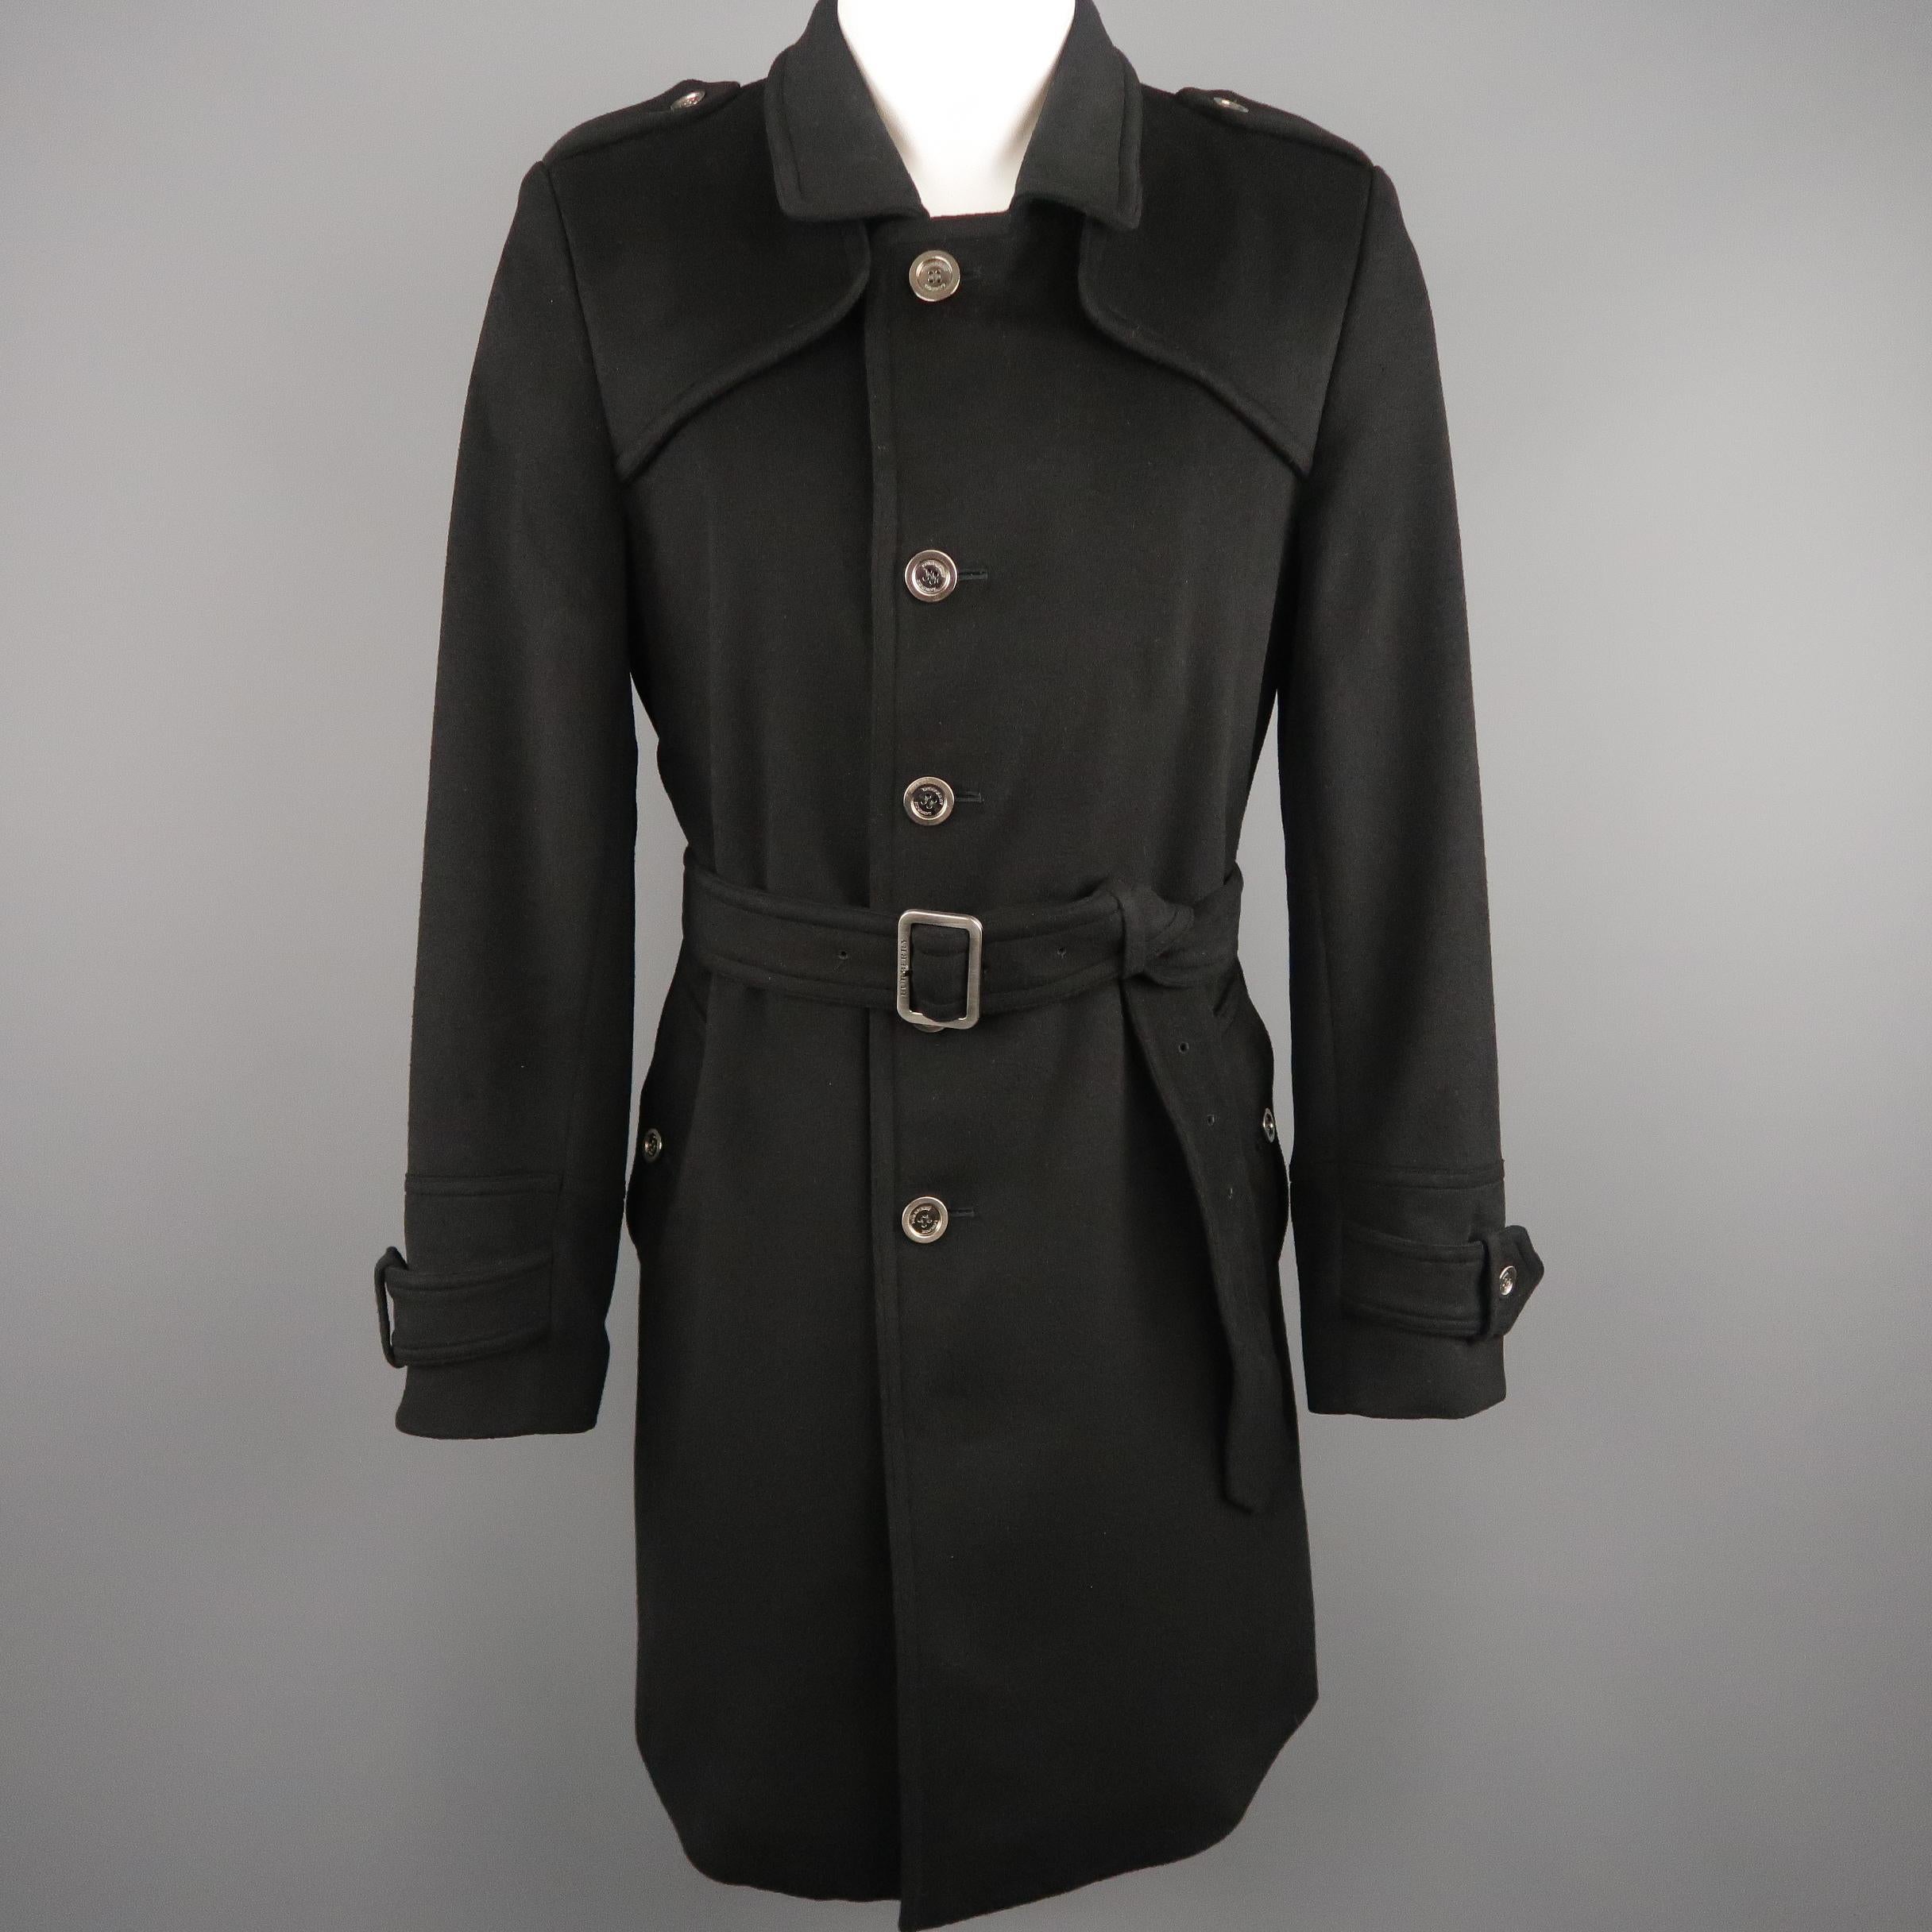 BURBERRY LONDON Trenchcoat comes in a black tone in a solid wool blend material, with epaulettes, a notch lapel, 5 buttons closure, single breasted, slit pockets, belted cuffs and single vent at back, belted. Made in England.
 
Excellent Pre-Owned